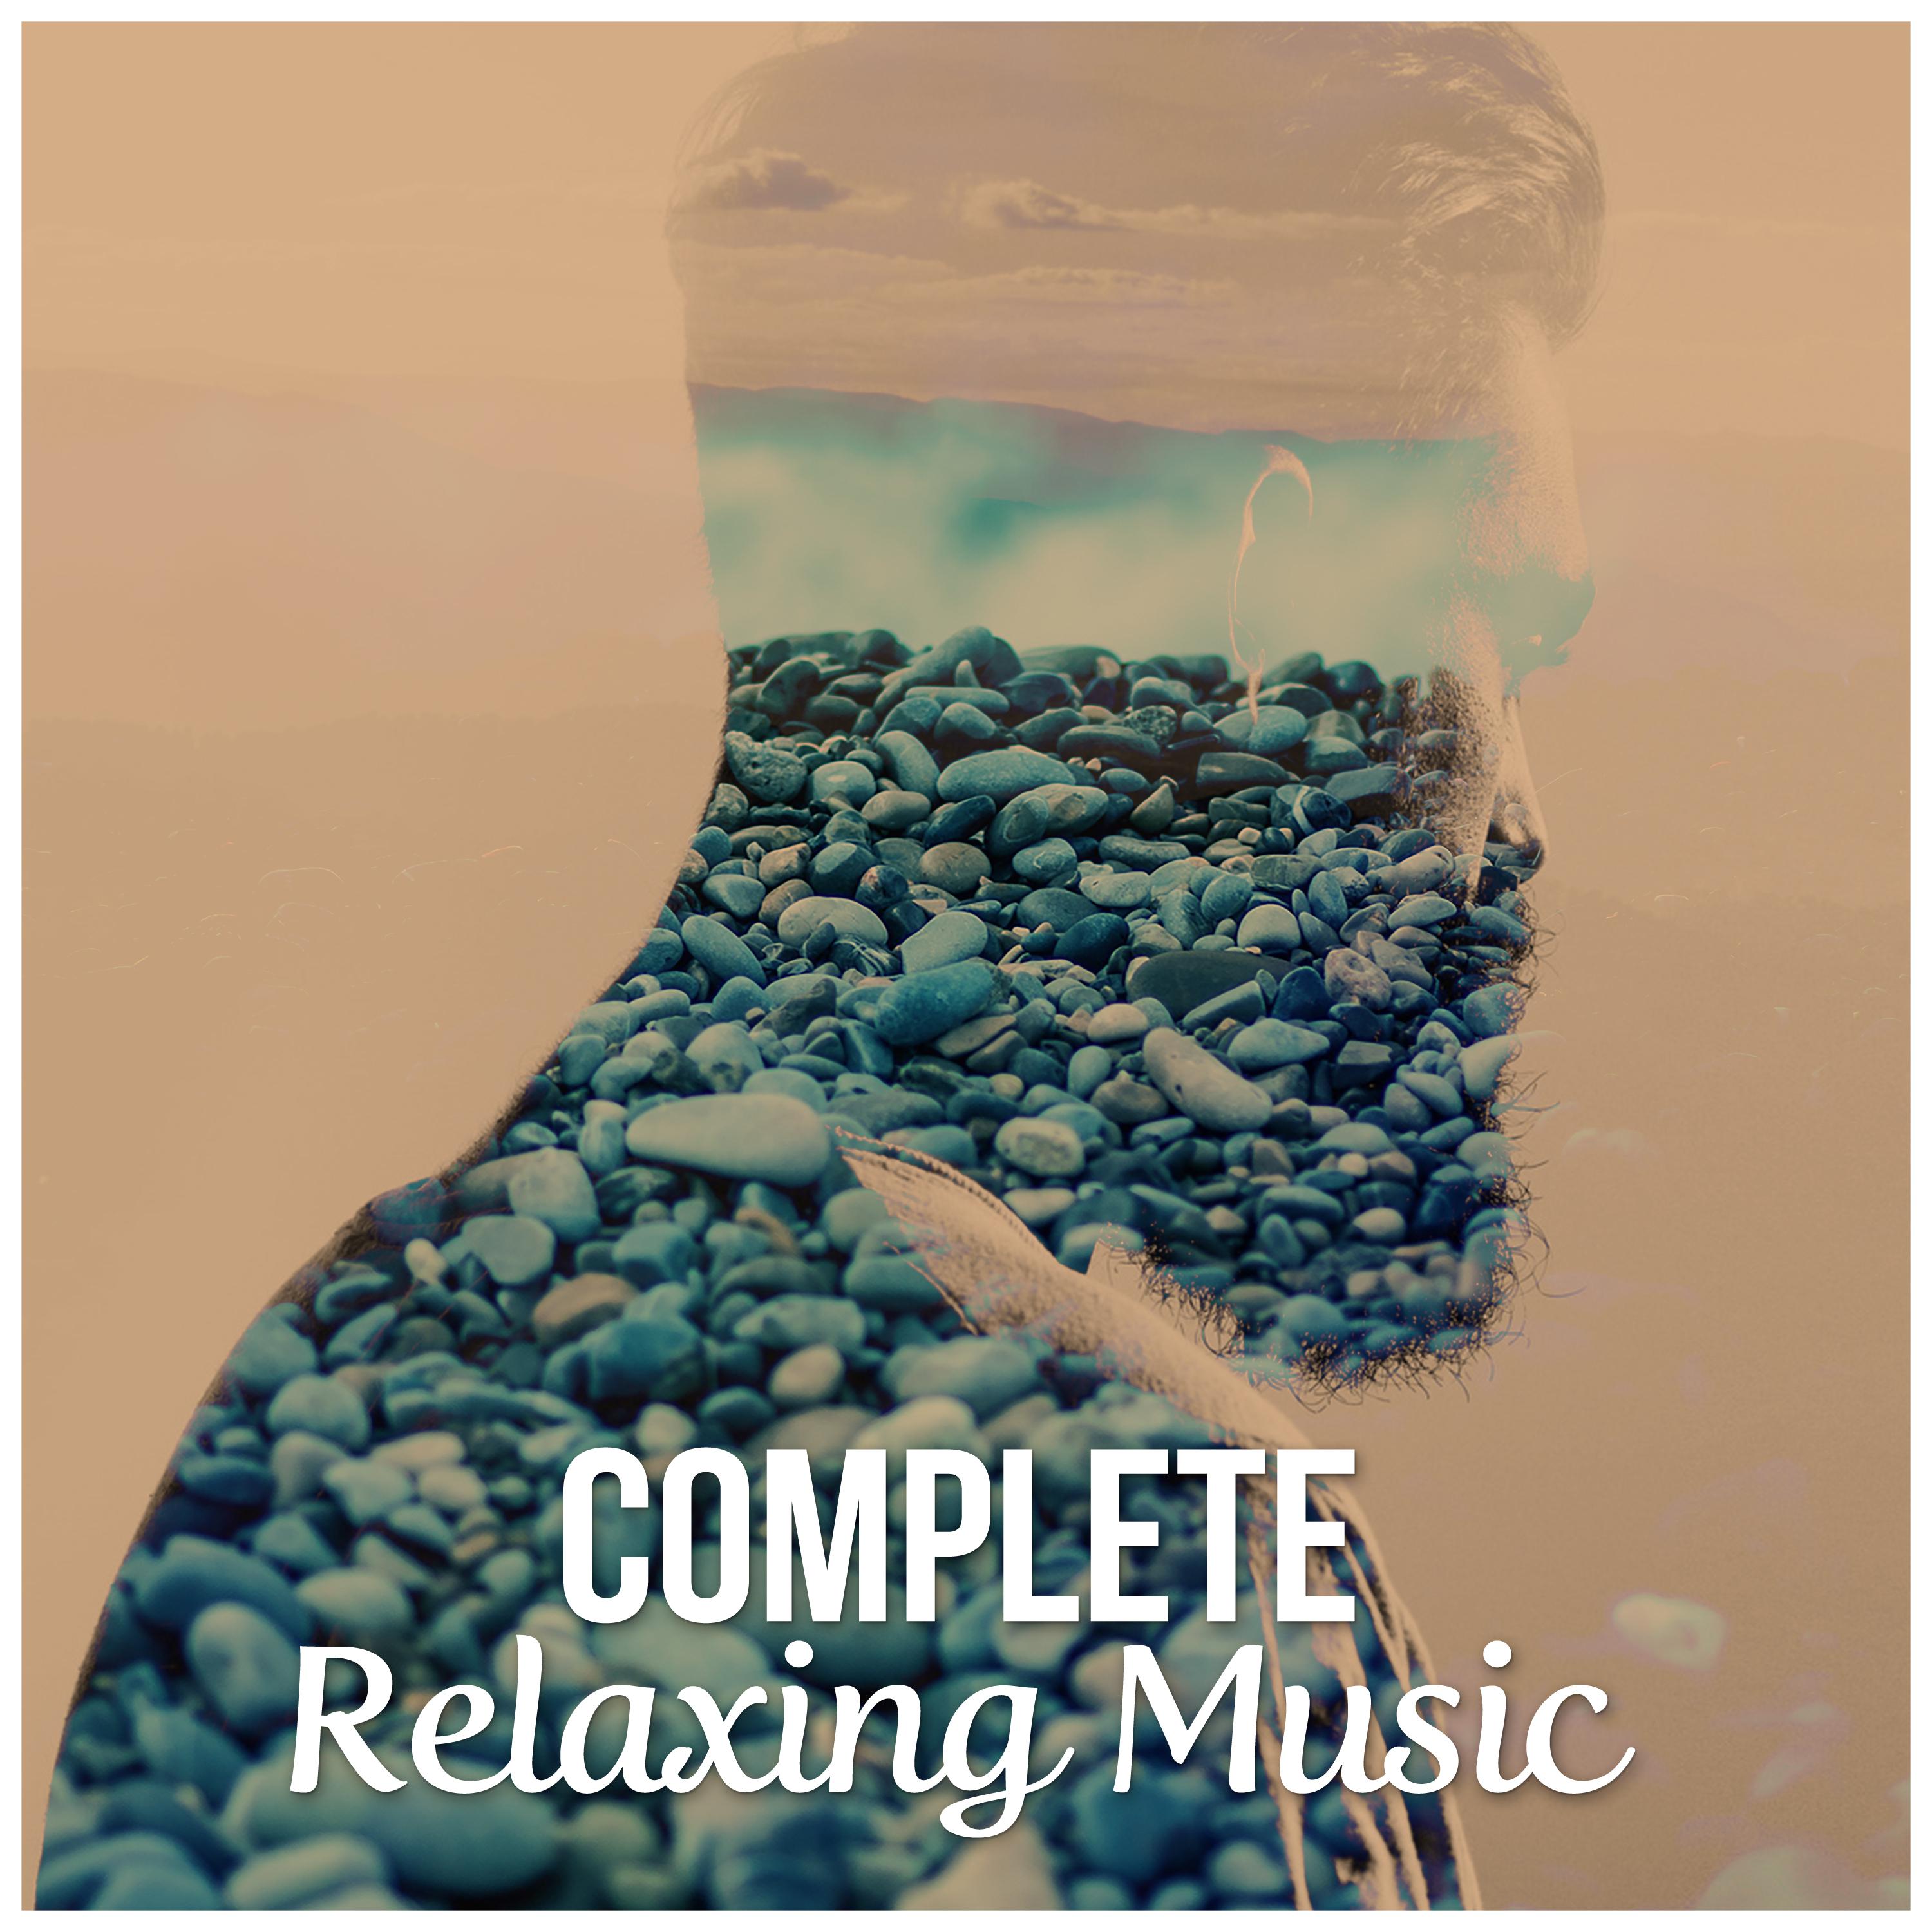 Complete Relaxing Music